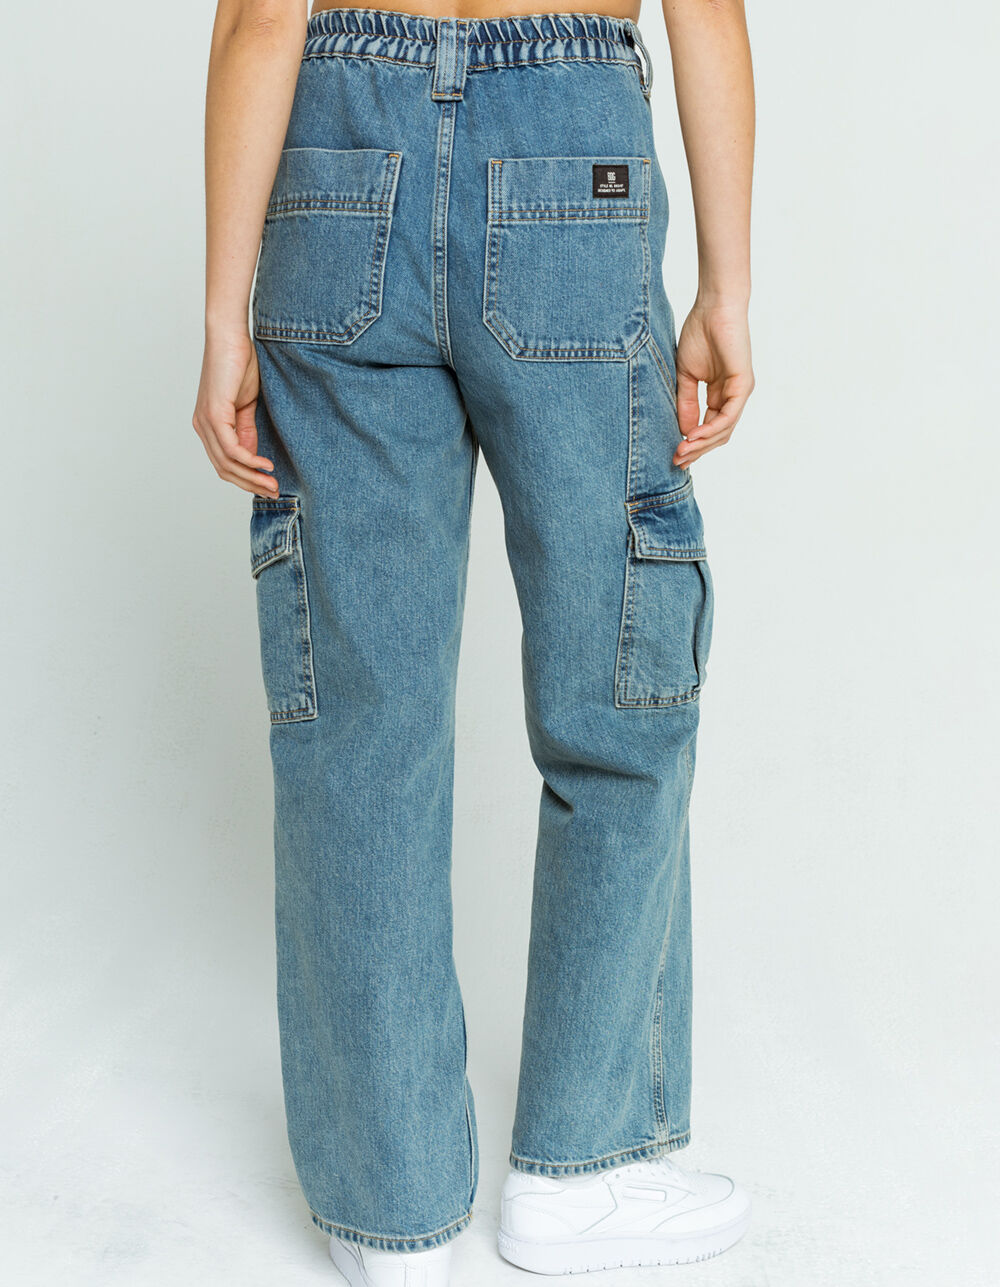 BDG by UO Relaxed Skate Jean Size 31 Women’s BNWT 